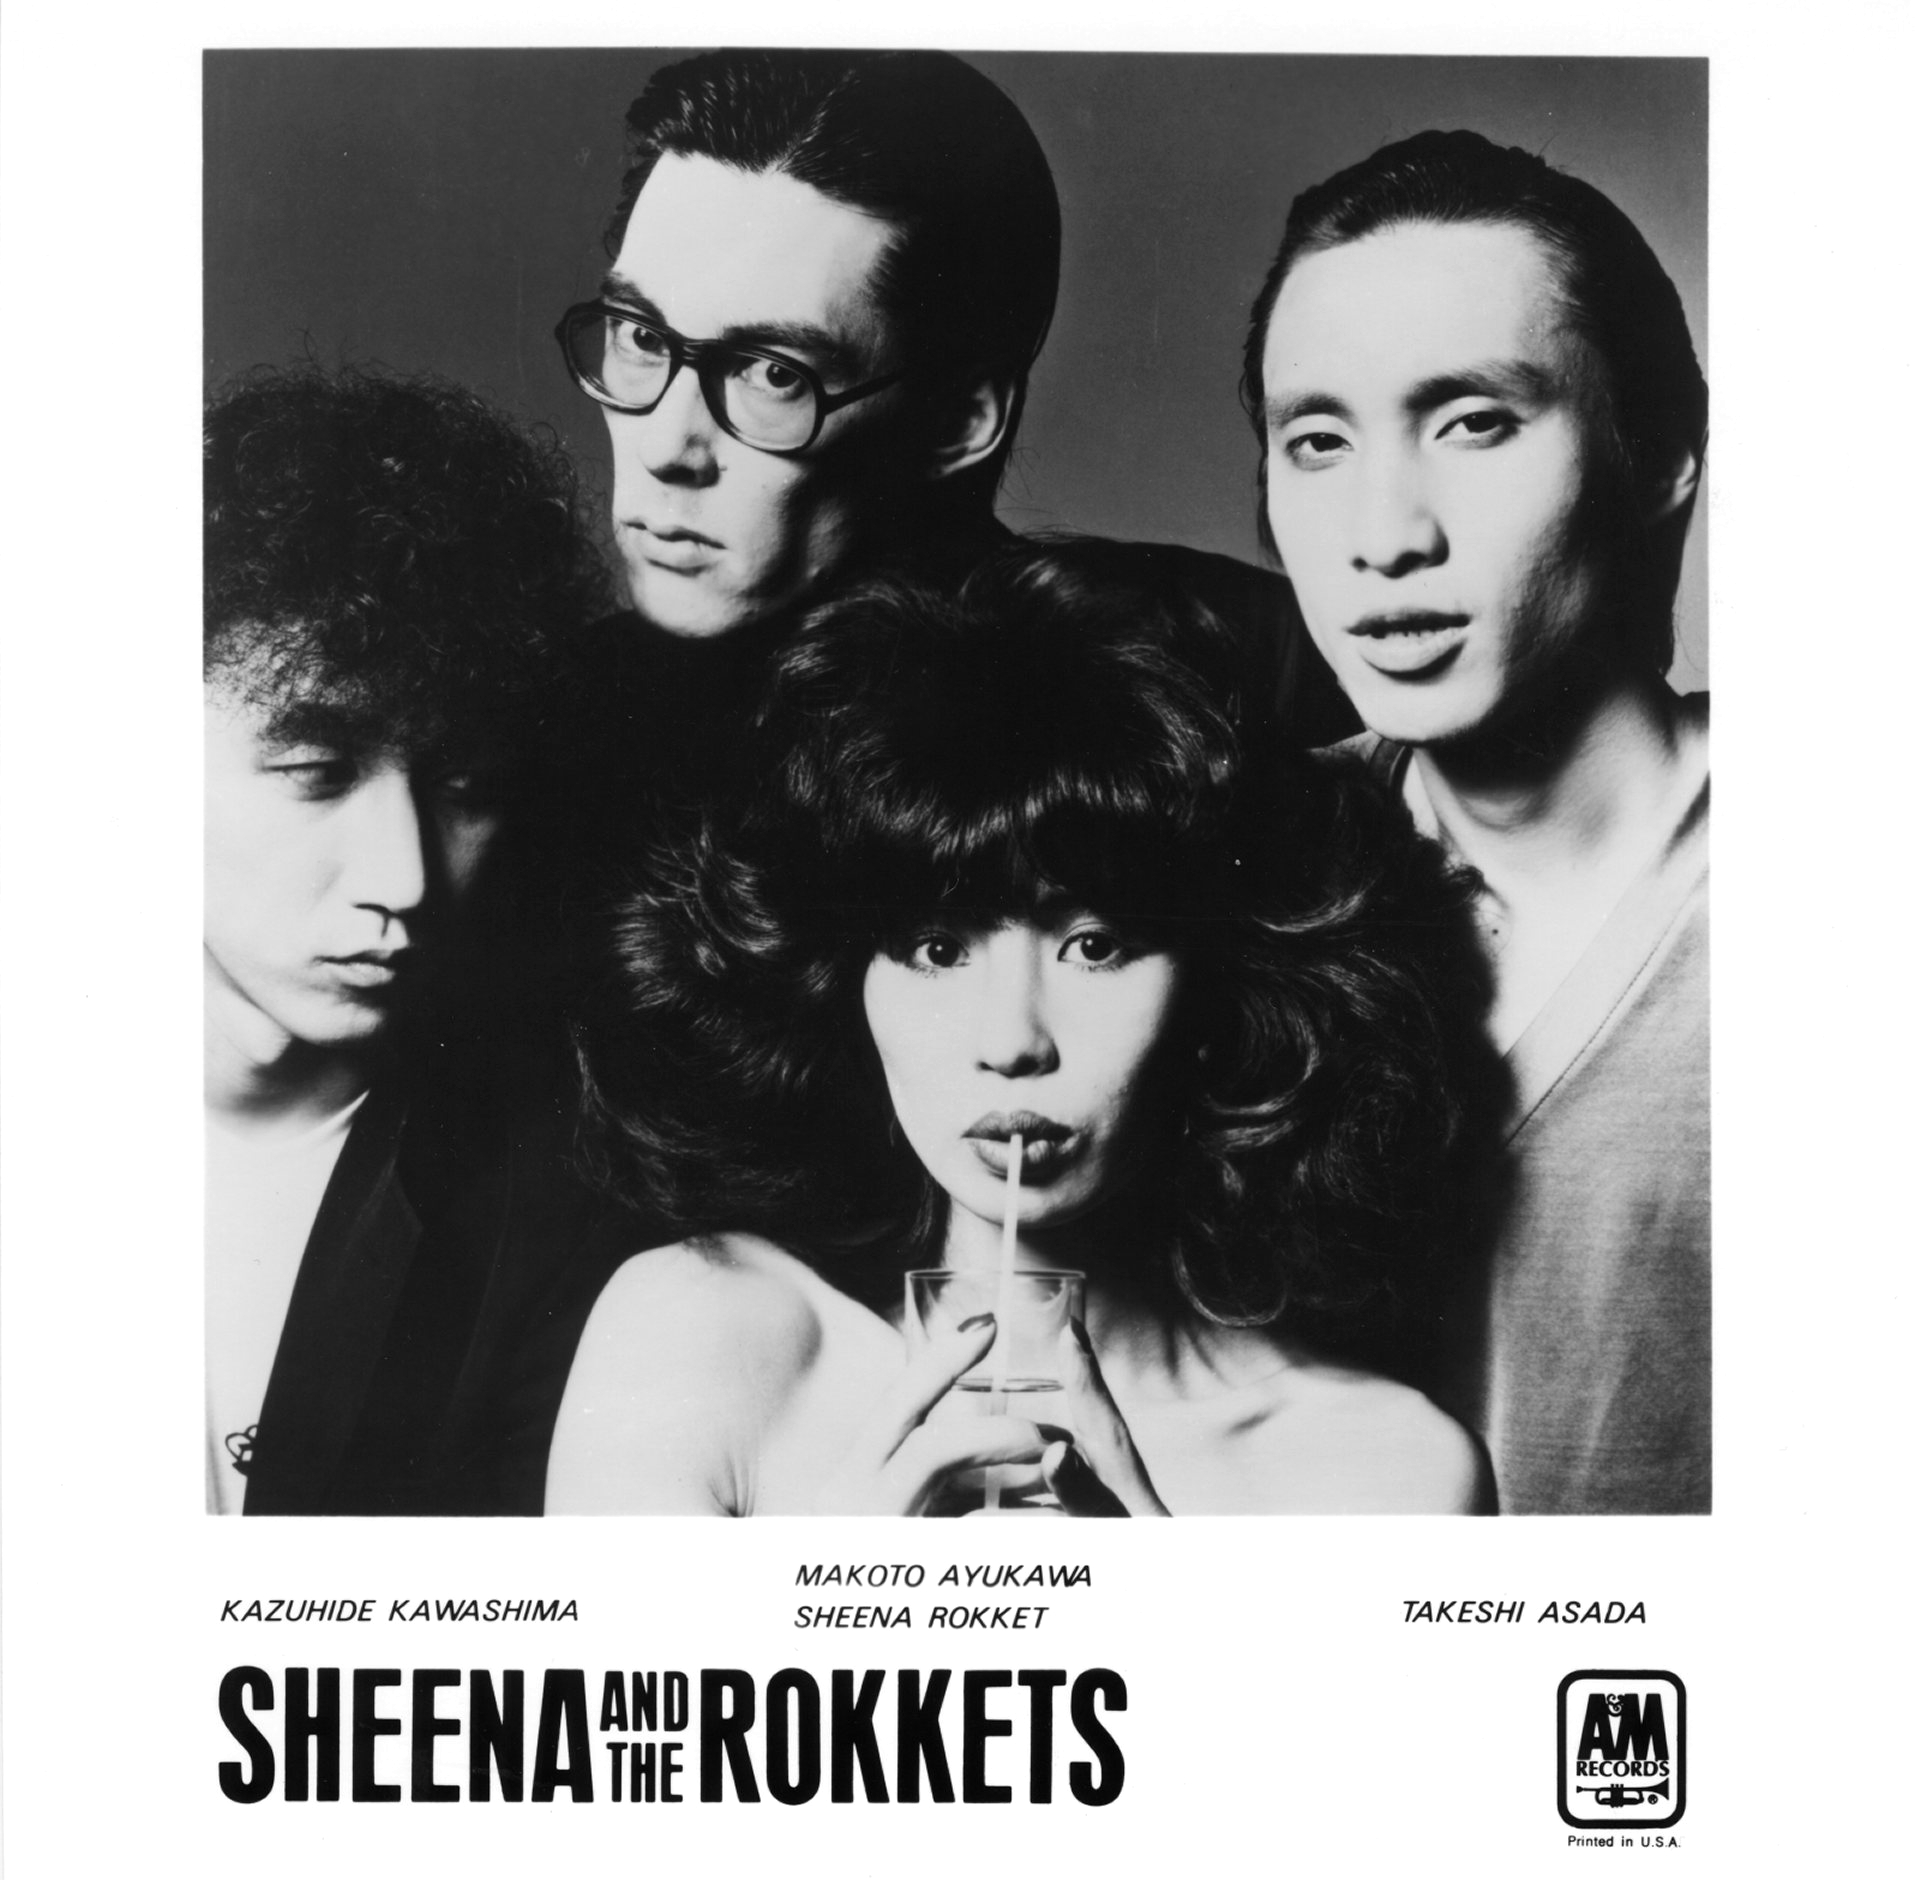 Sheena & the Rokkets | On A&M Records